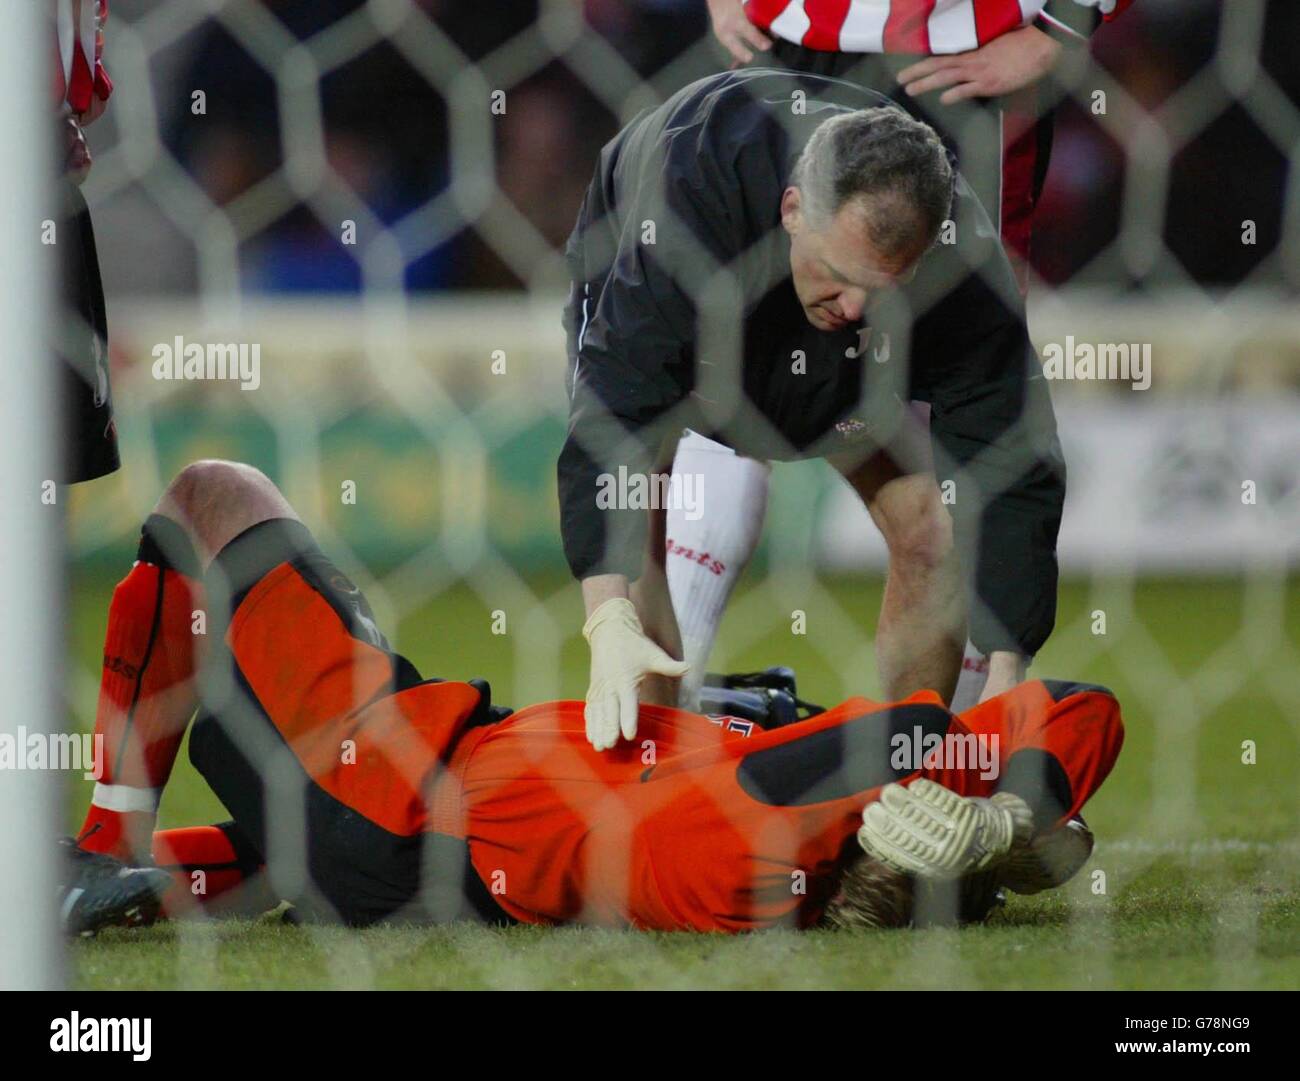 Southampton goalkeeper Antti Niemi lies prostate after a clash with Ruud Van Nistelrooy of Manchester United during their FA Barclaycard Premiership match at Southampton's St Mary's Stadium. Final score Southampton 0 Man Utd 2. Stock Photo